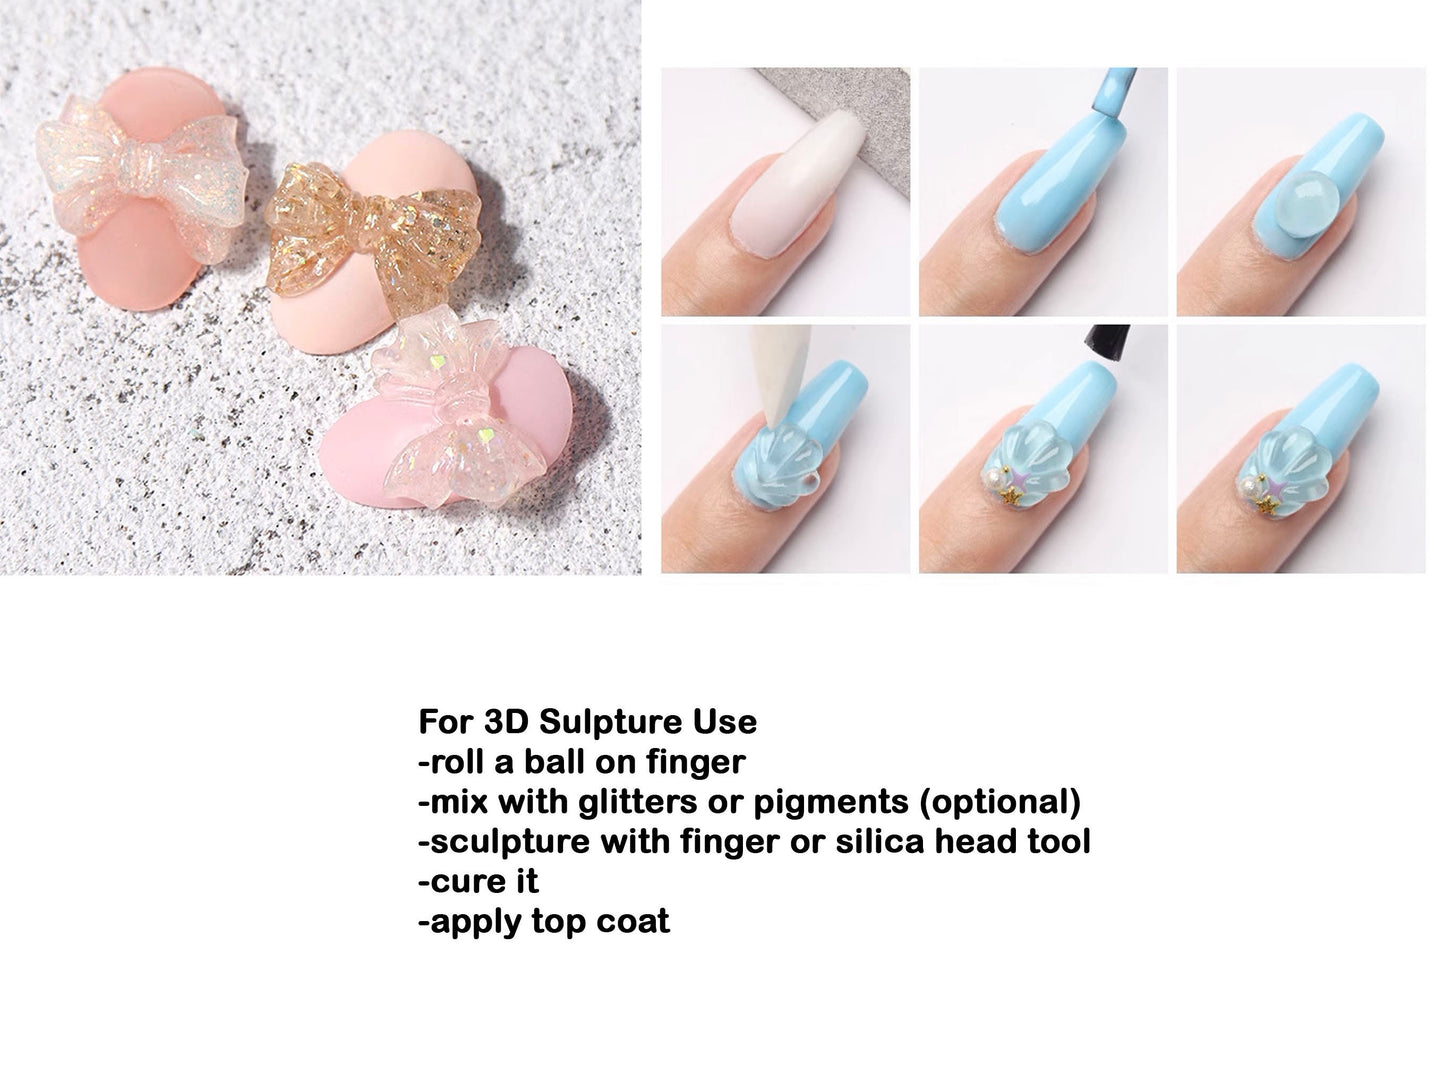 10g Solid Extension 3D Modeling UV Gel/ Quick Building Solid Poly Gel Nail Builder Gels/ Easy Non-Sticky Sculpture Gel Manicure Supply